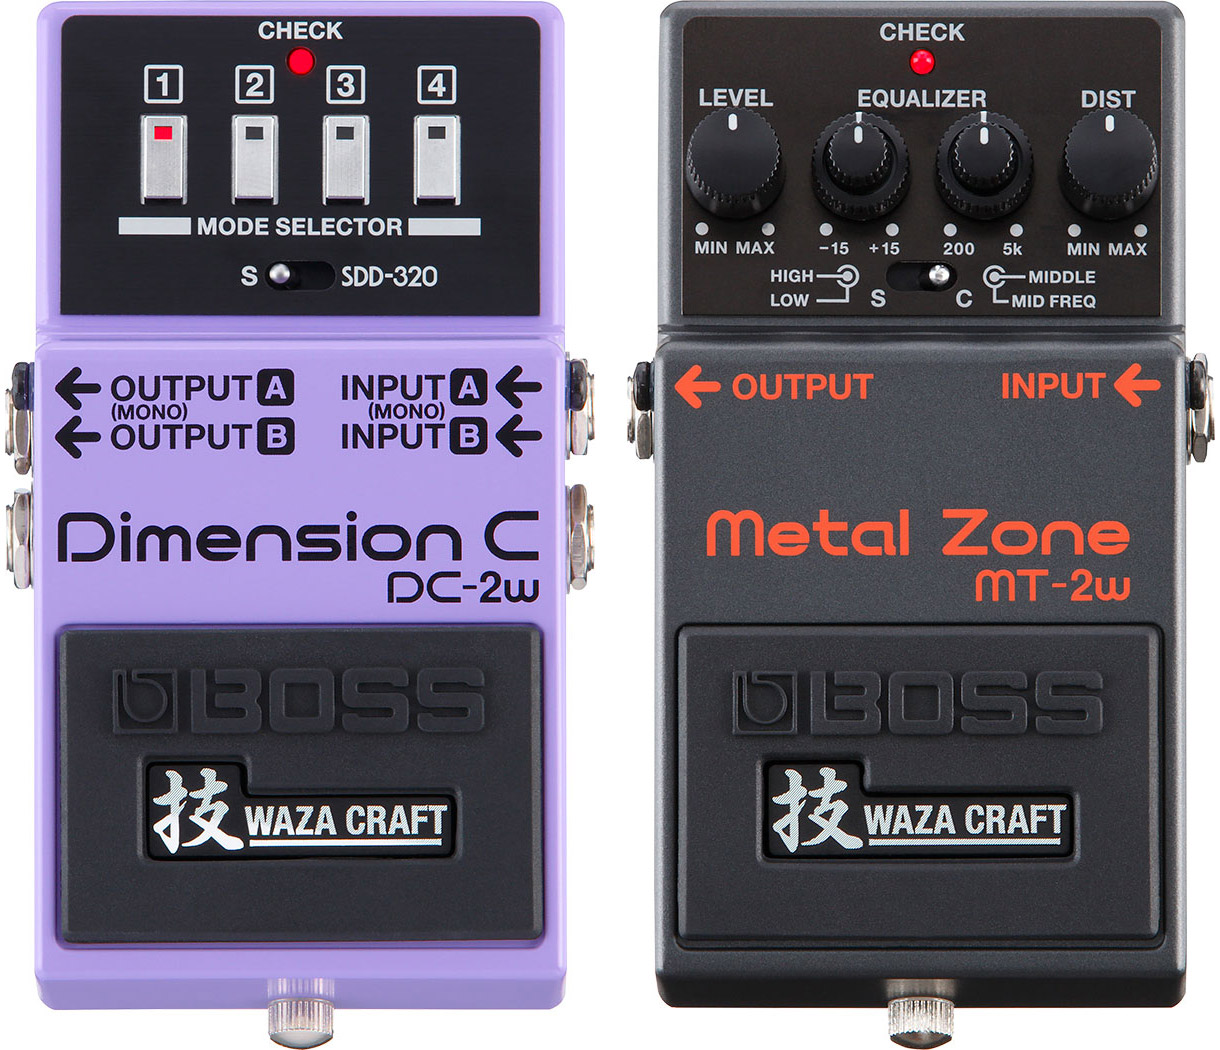 Boss DC-2W Dimension C and MT-2W Metal Zone Pedals